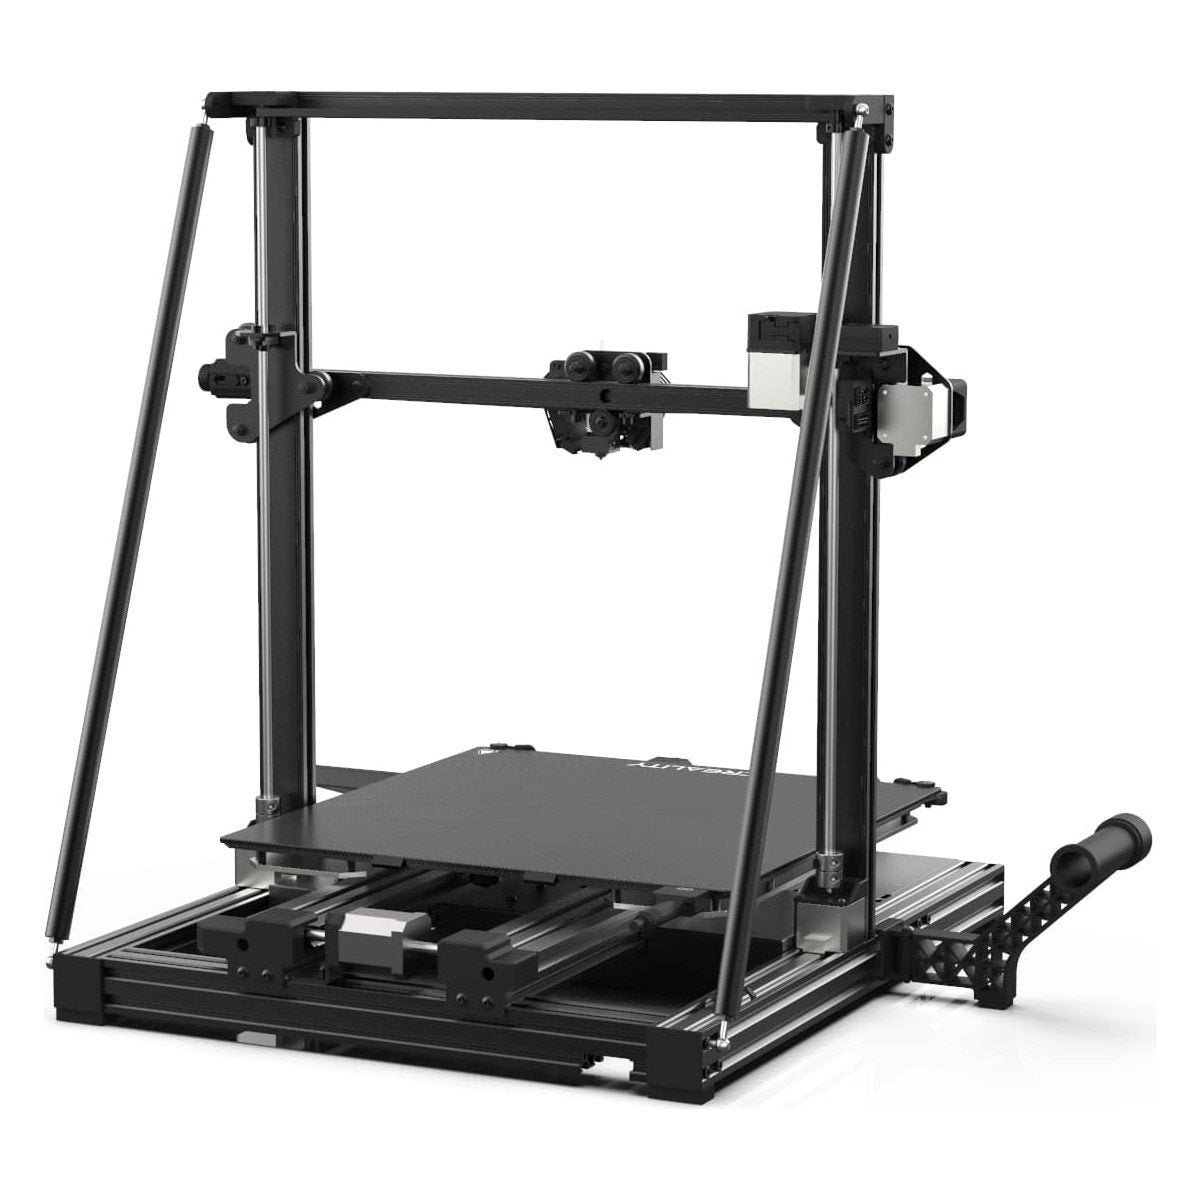 Creality 3D® CR-6 Max 3D Printer (400x400x400mm Build Volume) HD Colour Touchscreen/Intelligent Auto Leveling/Silent Motherboard